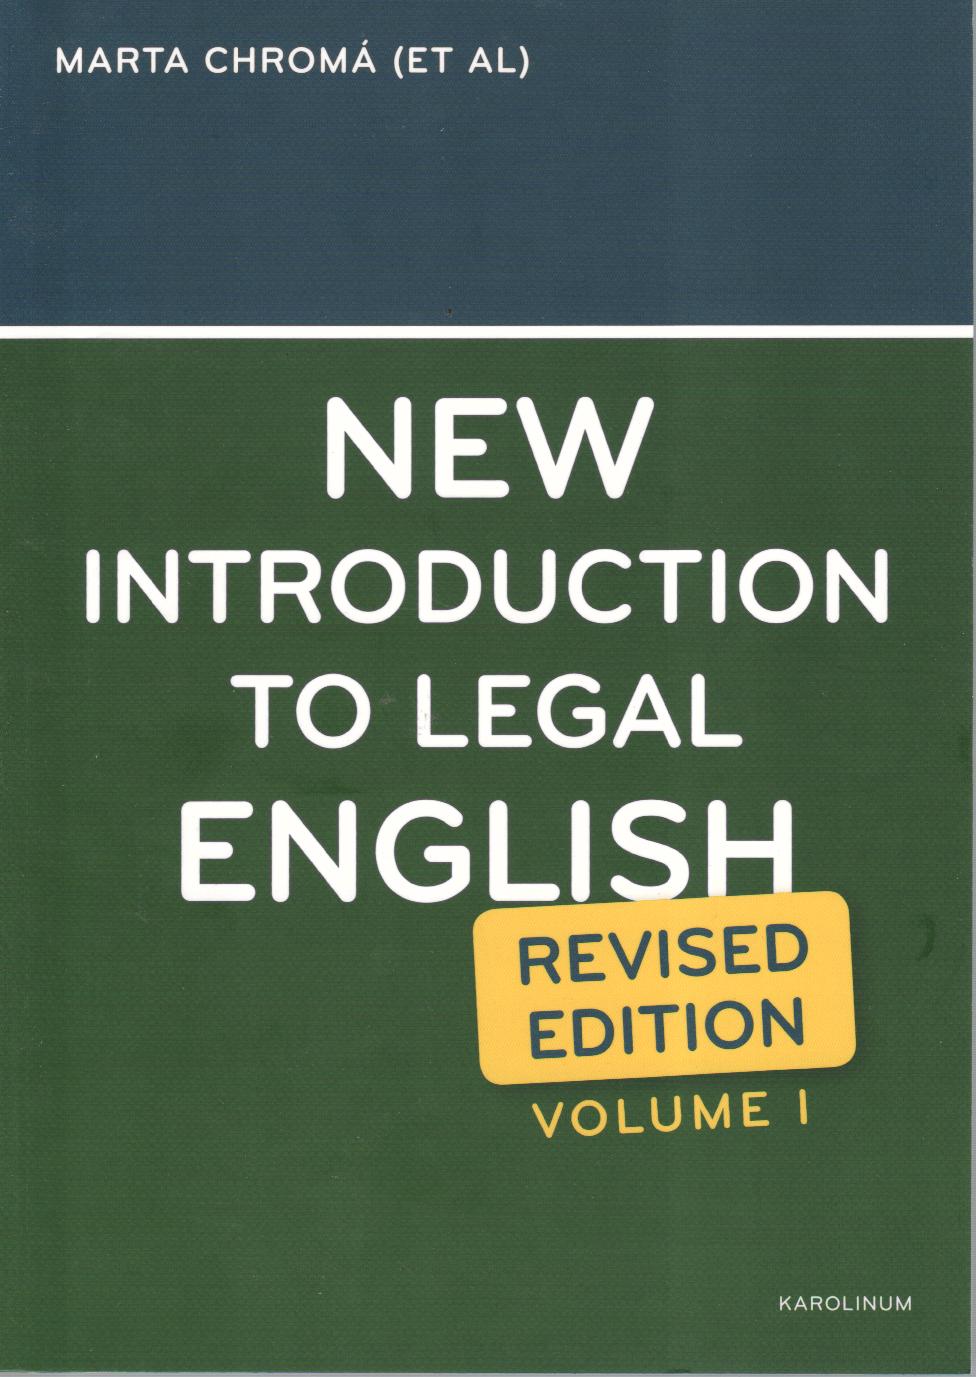 New Introduction to Legal English Volume 1